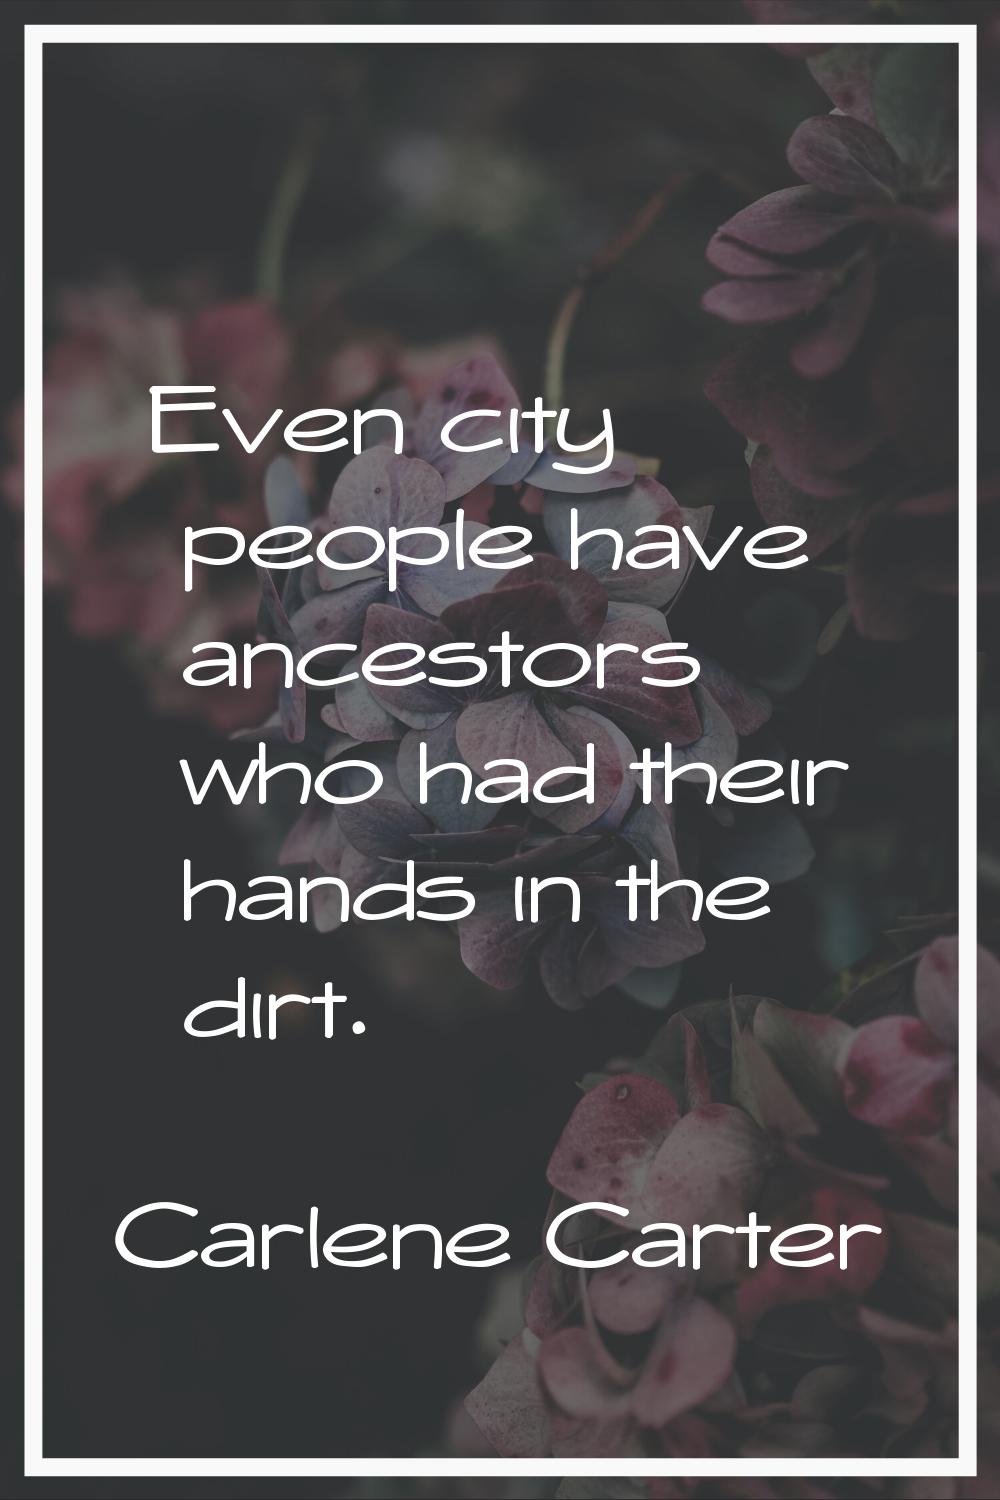 Even city people have ancestors who had their hands in the dirt.